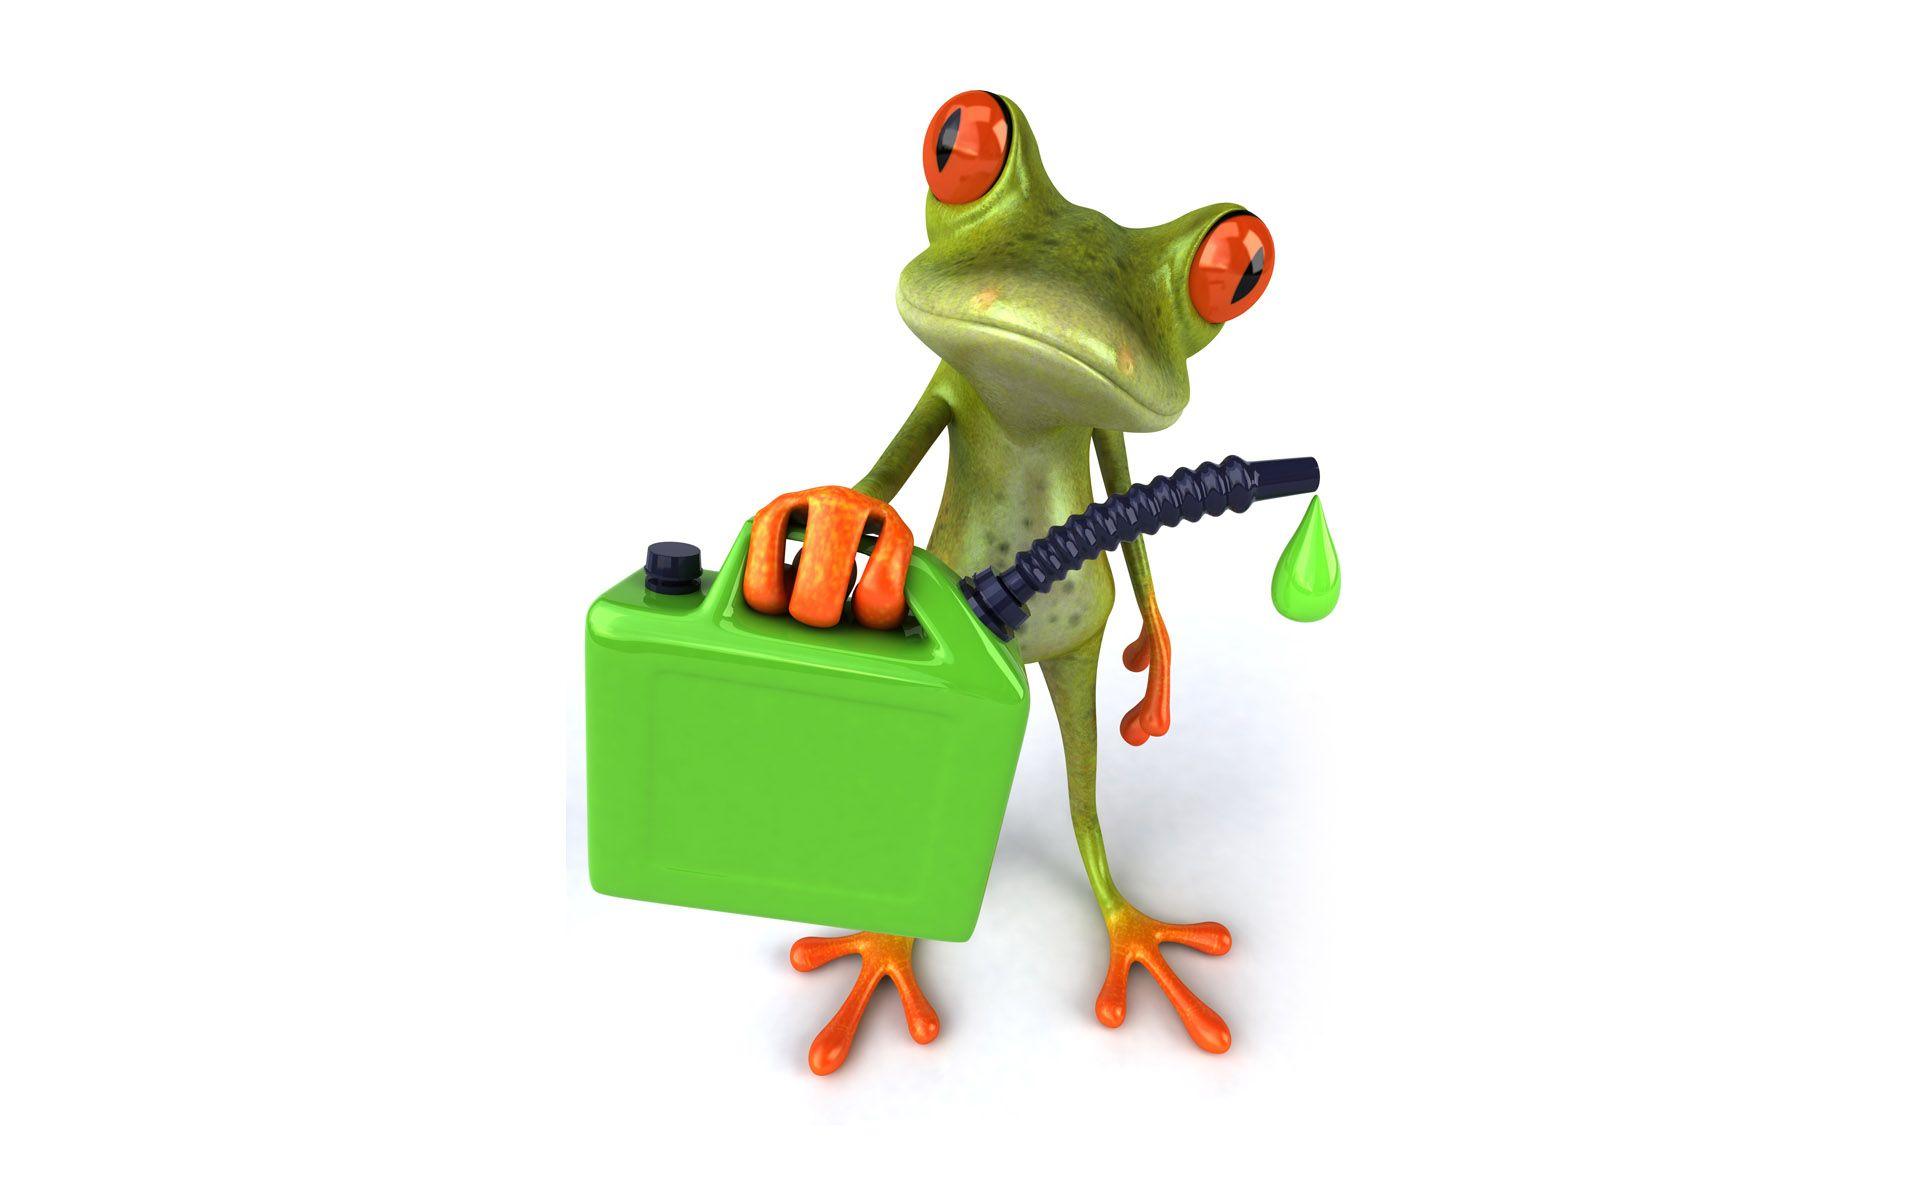 Funny Frog Wallpaper Android Mac 1920x1200PX Wallpaper Frog